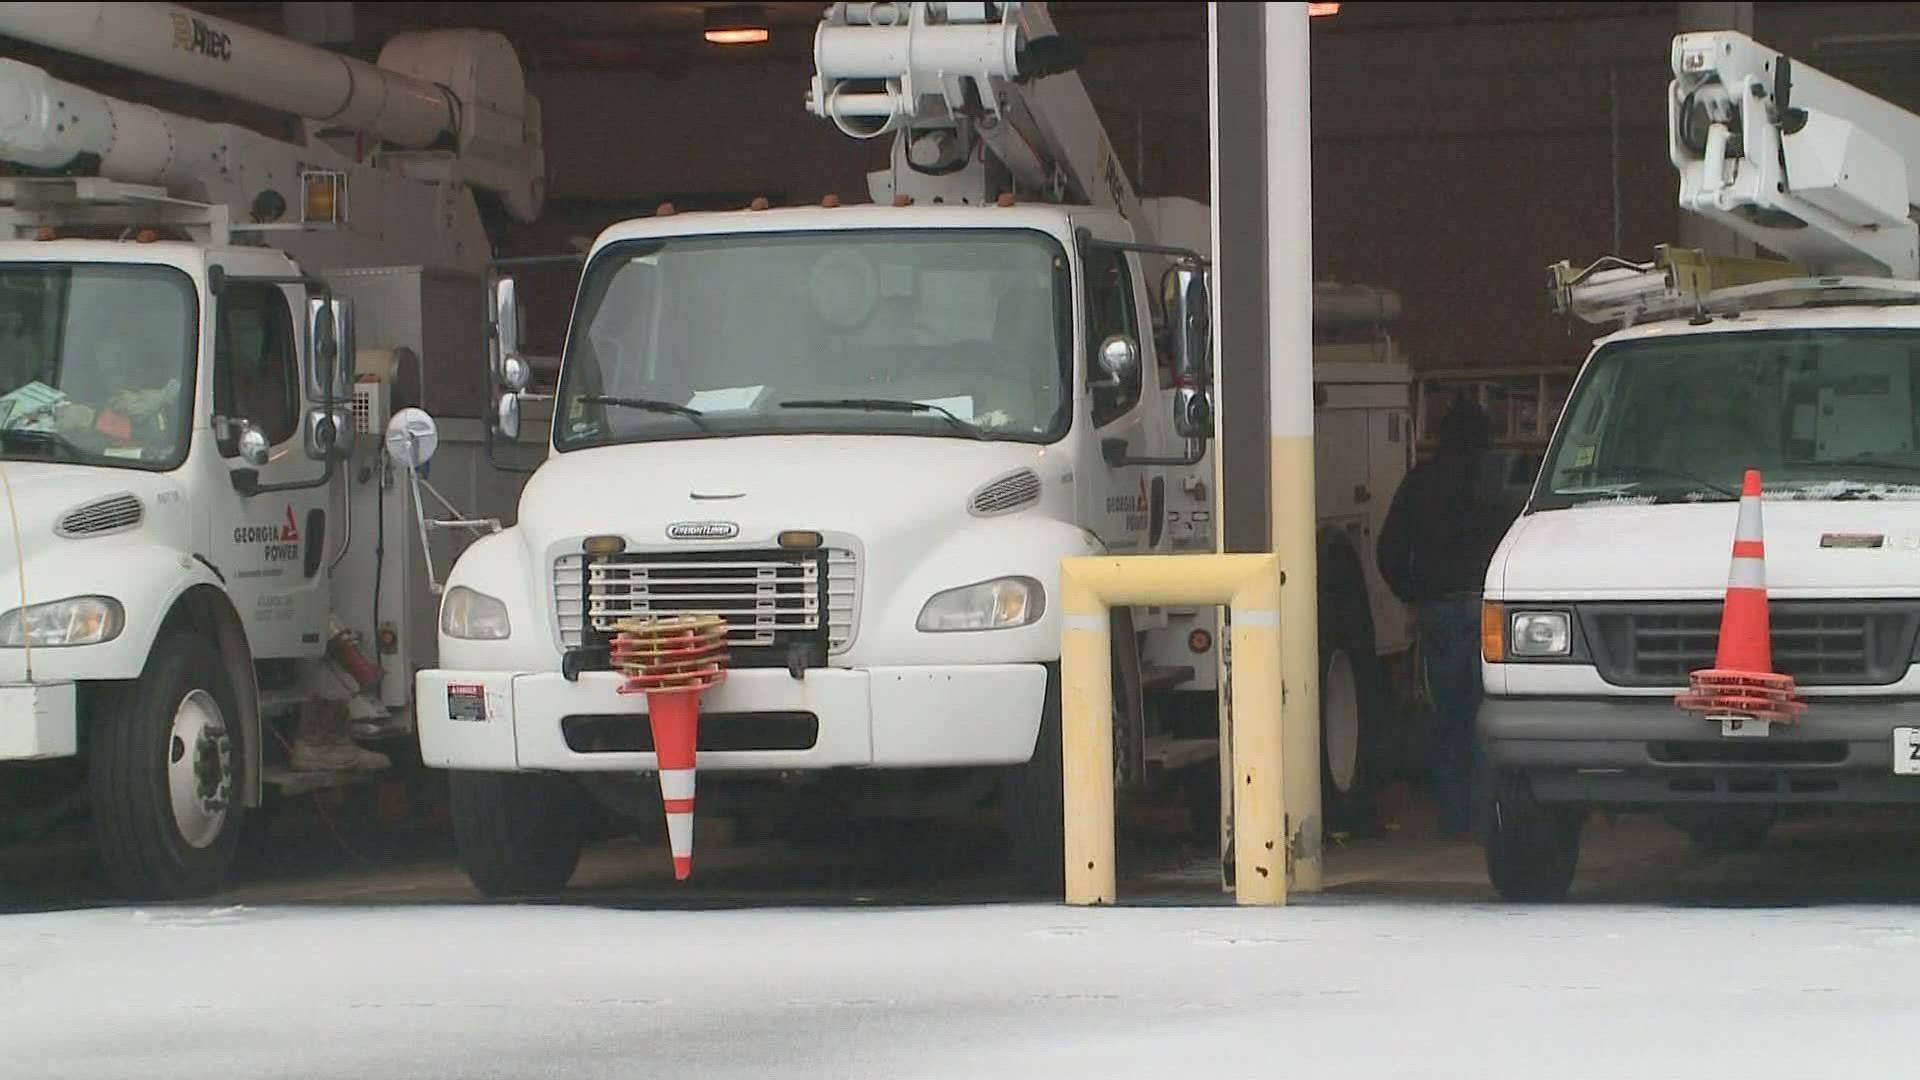 Power crews are closing out any orders ahead of Sunday's wintry mix.